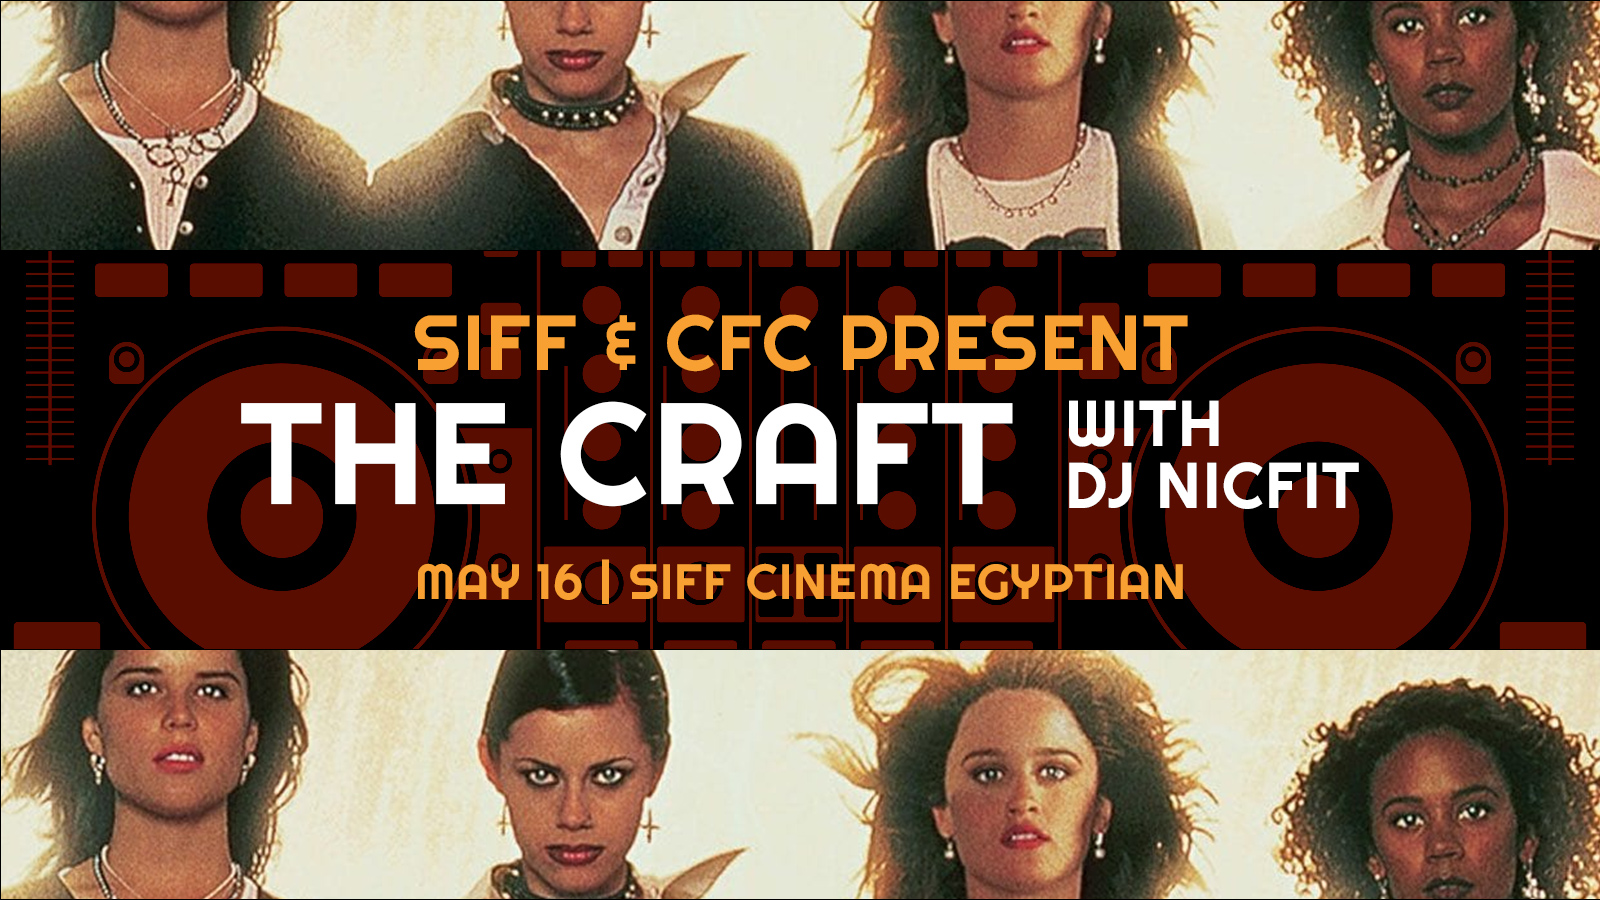 SIFF & CFC Present The Craft with DJ NicFit